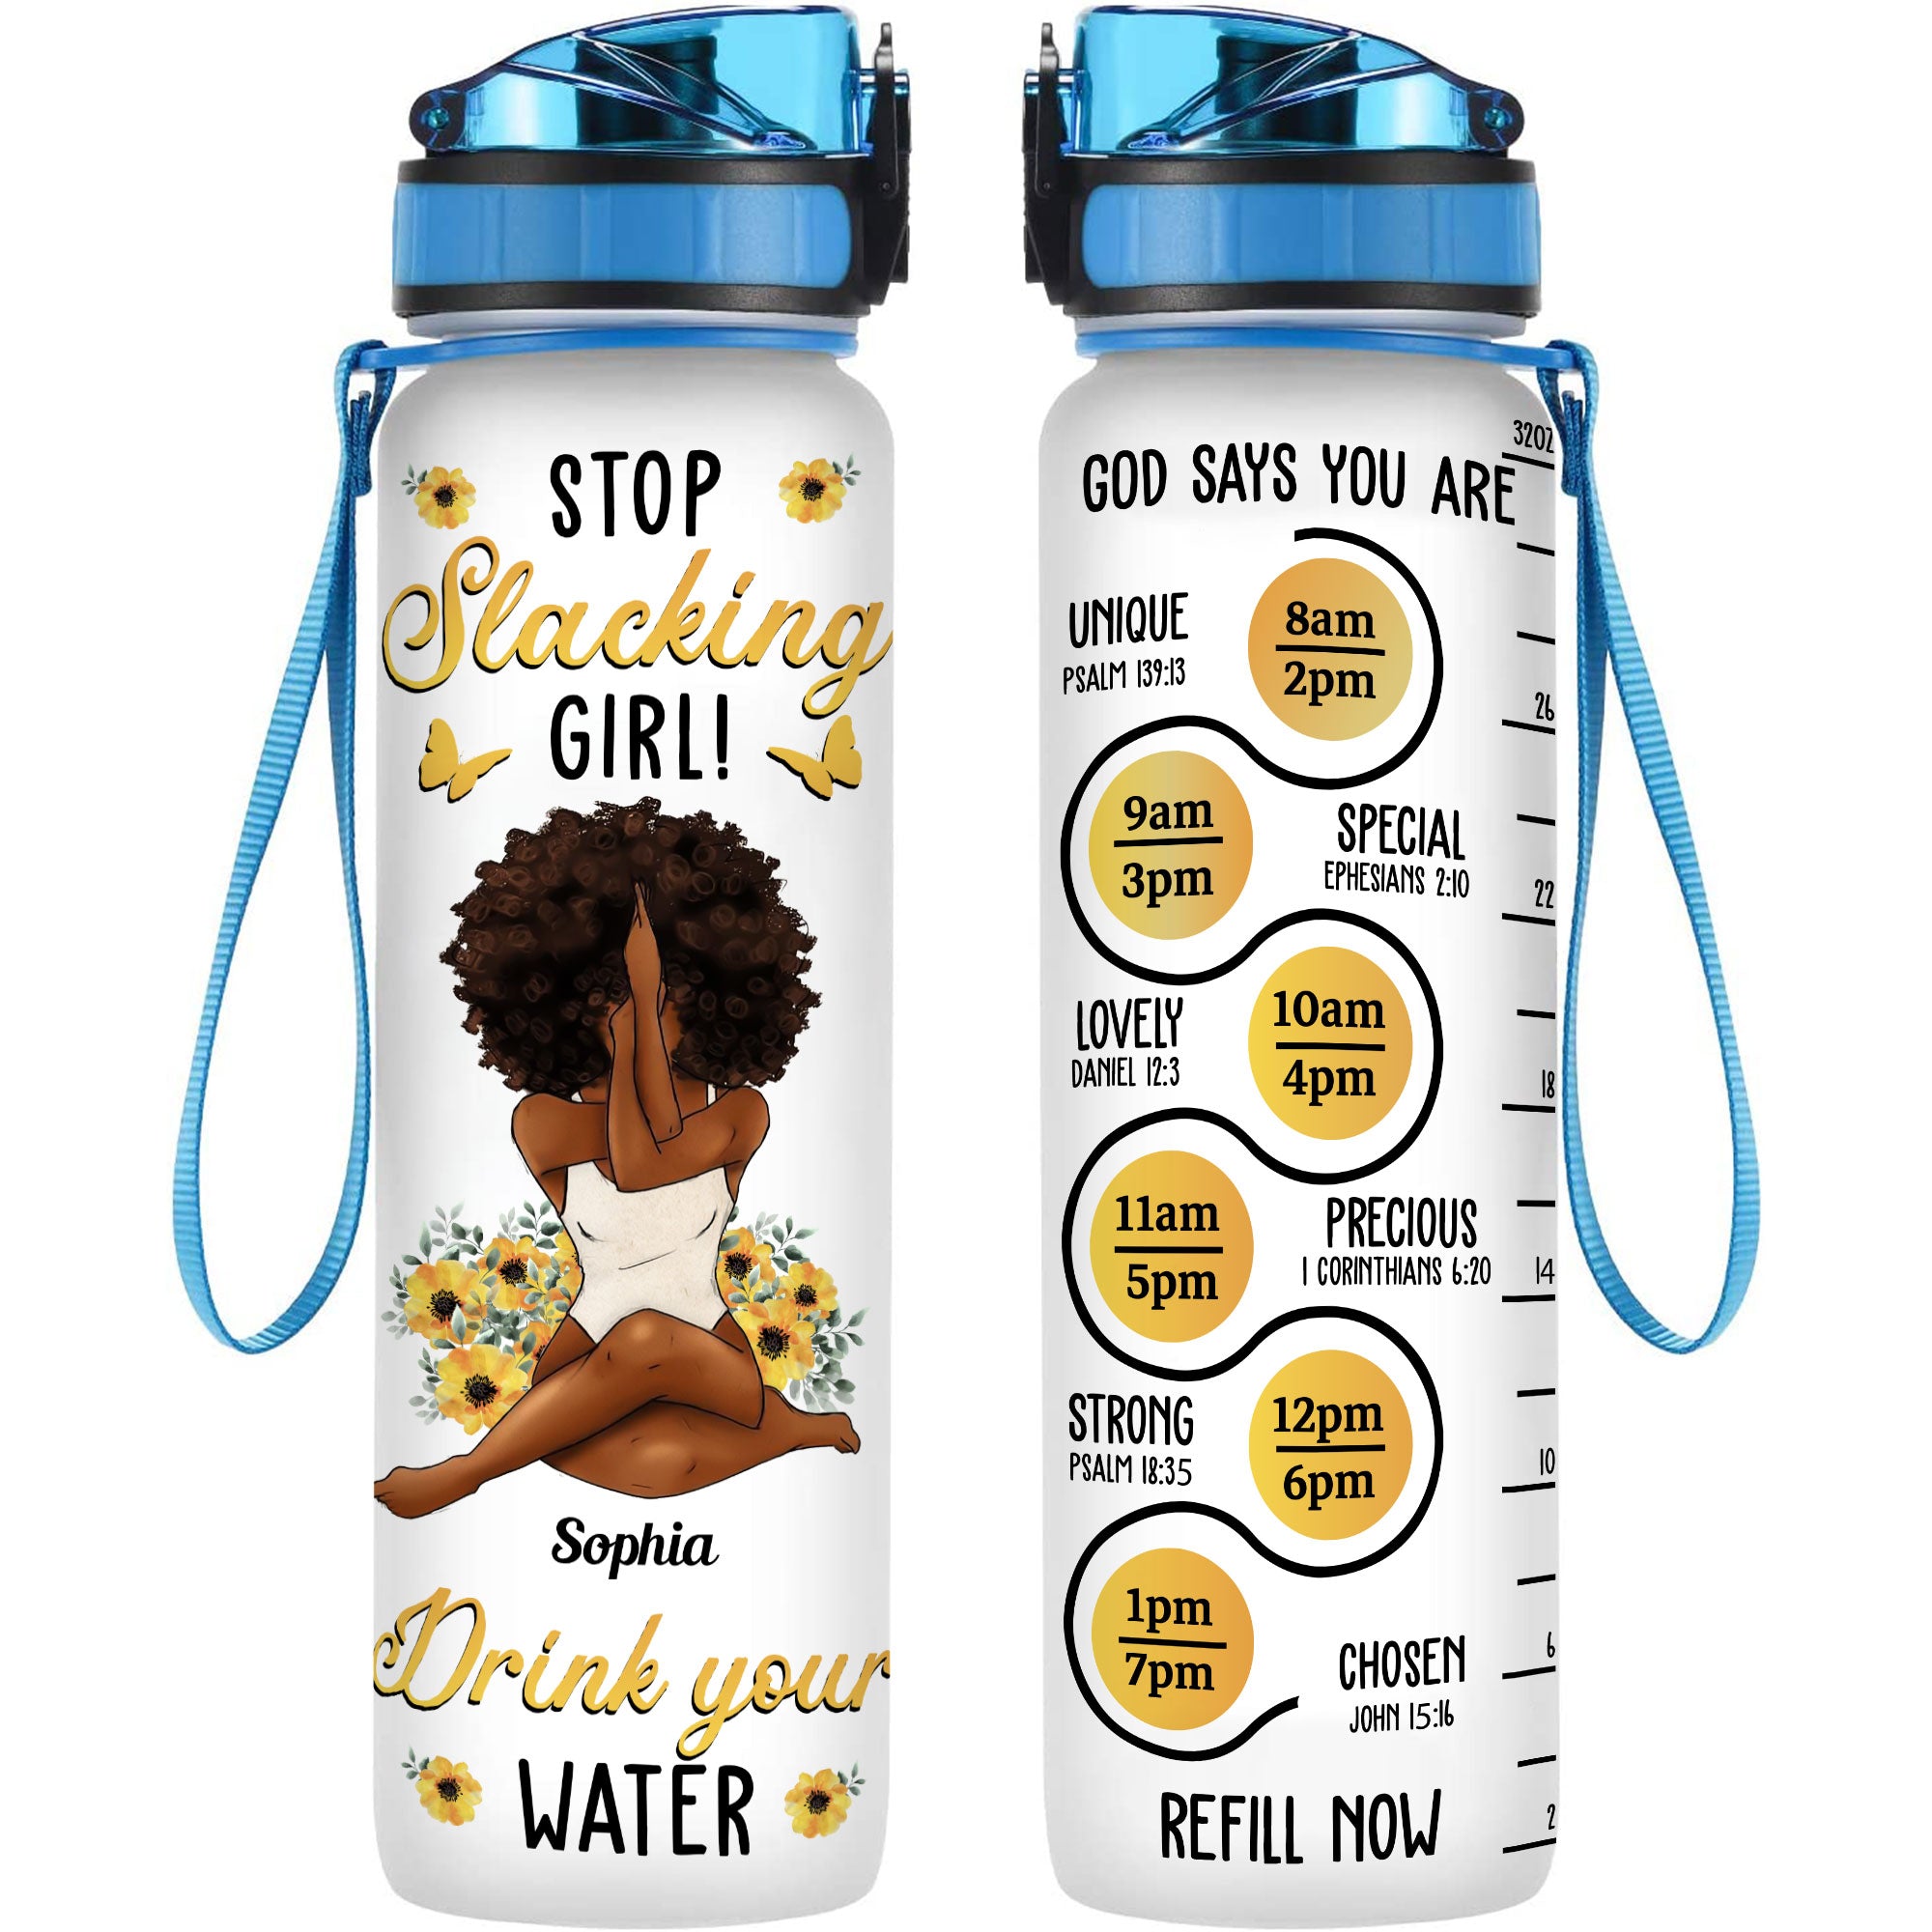 Stop Slacking Girl! Drink Your Water - Personalized Tracker Bottle